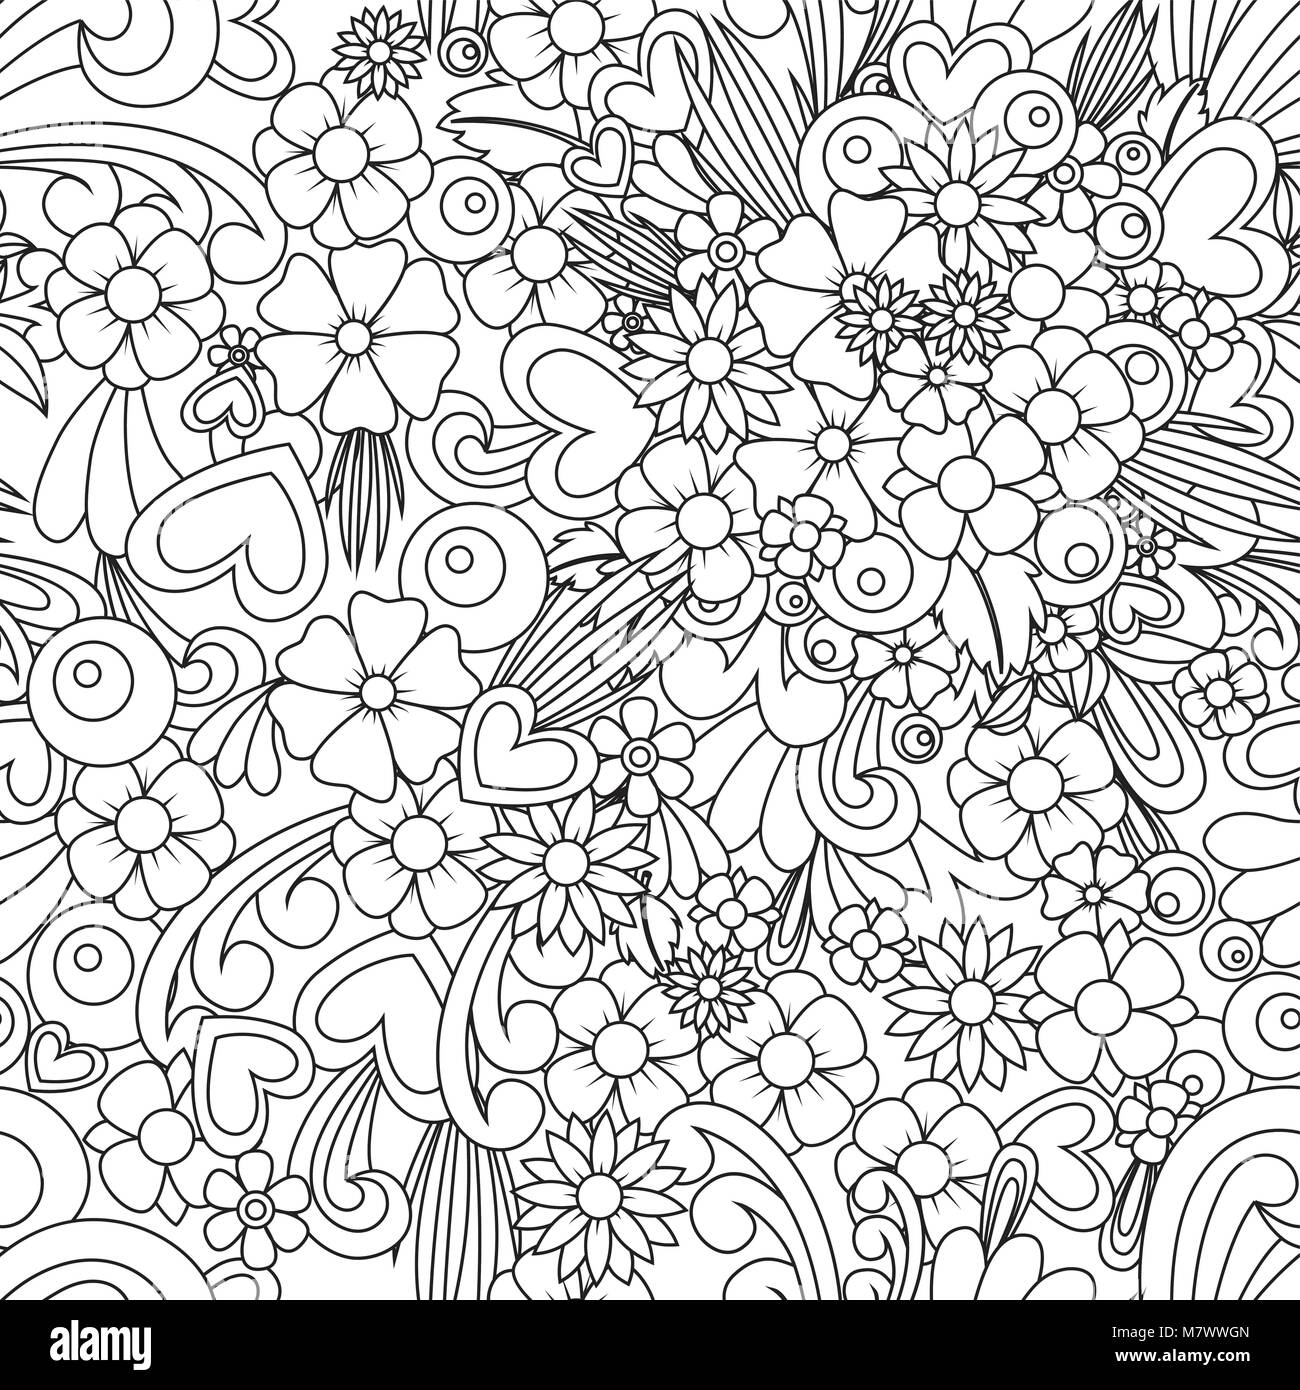 Abstract flower zentangle art. Black and white seamless pattern ...